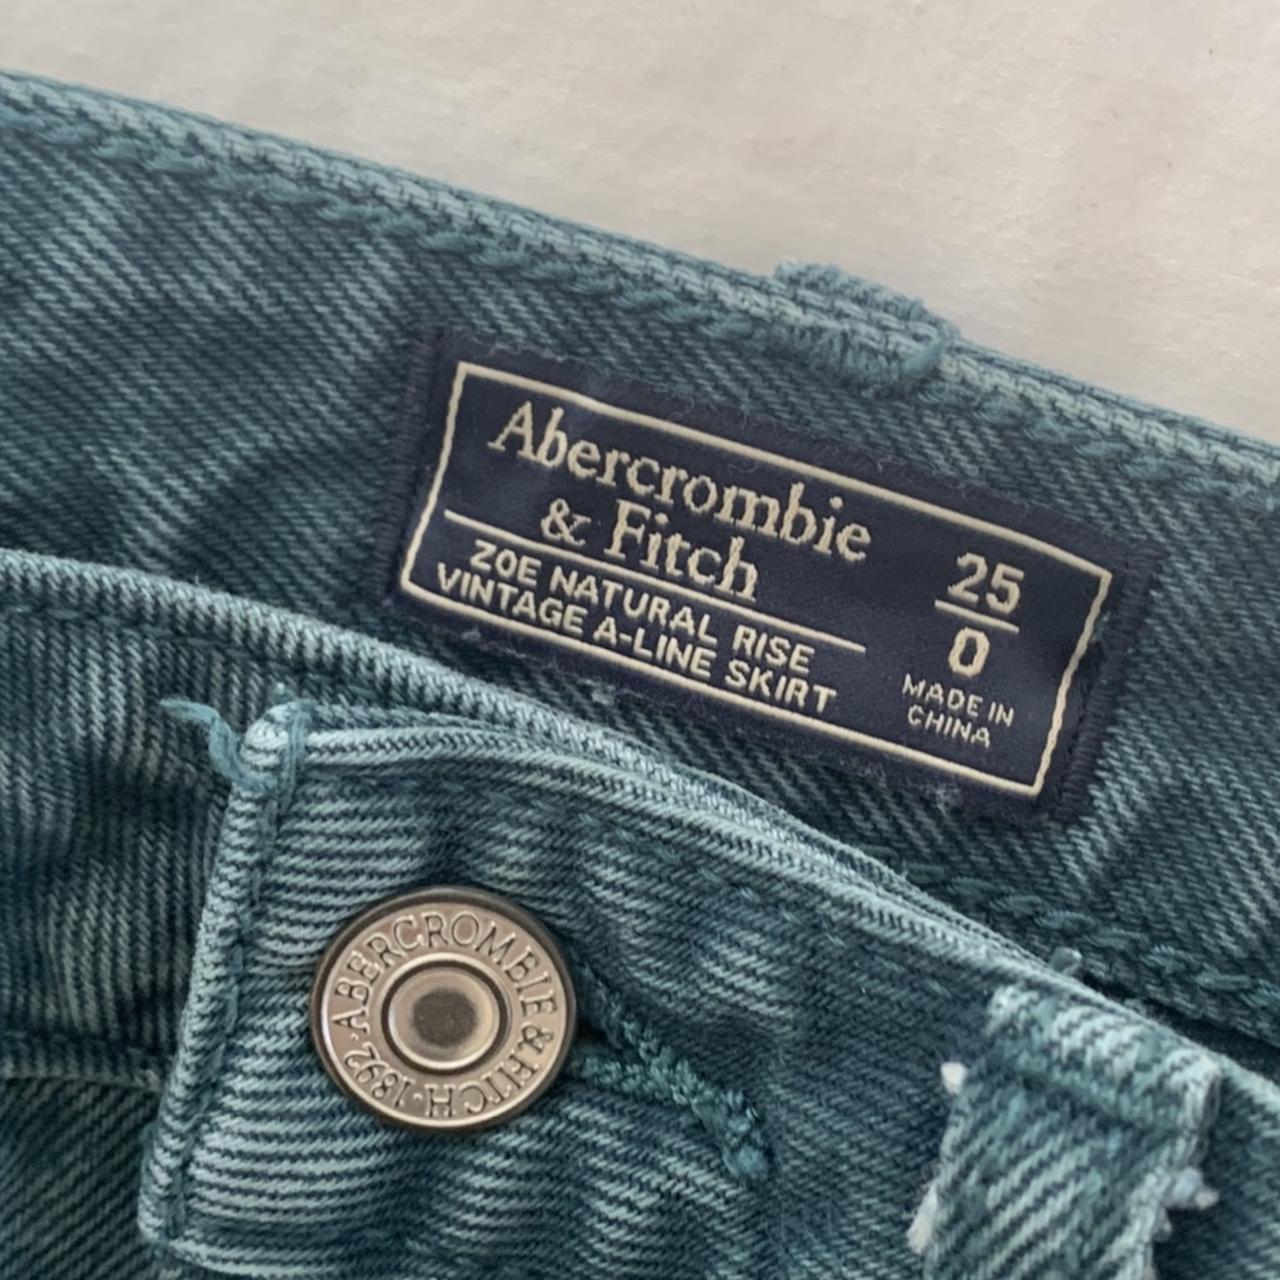 Abercrombie & Fitch Women's Blue and Navy Skirt